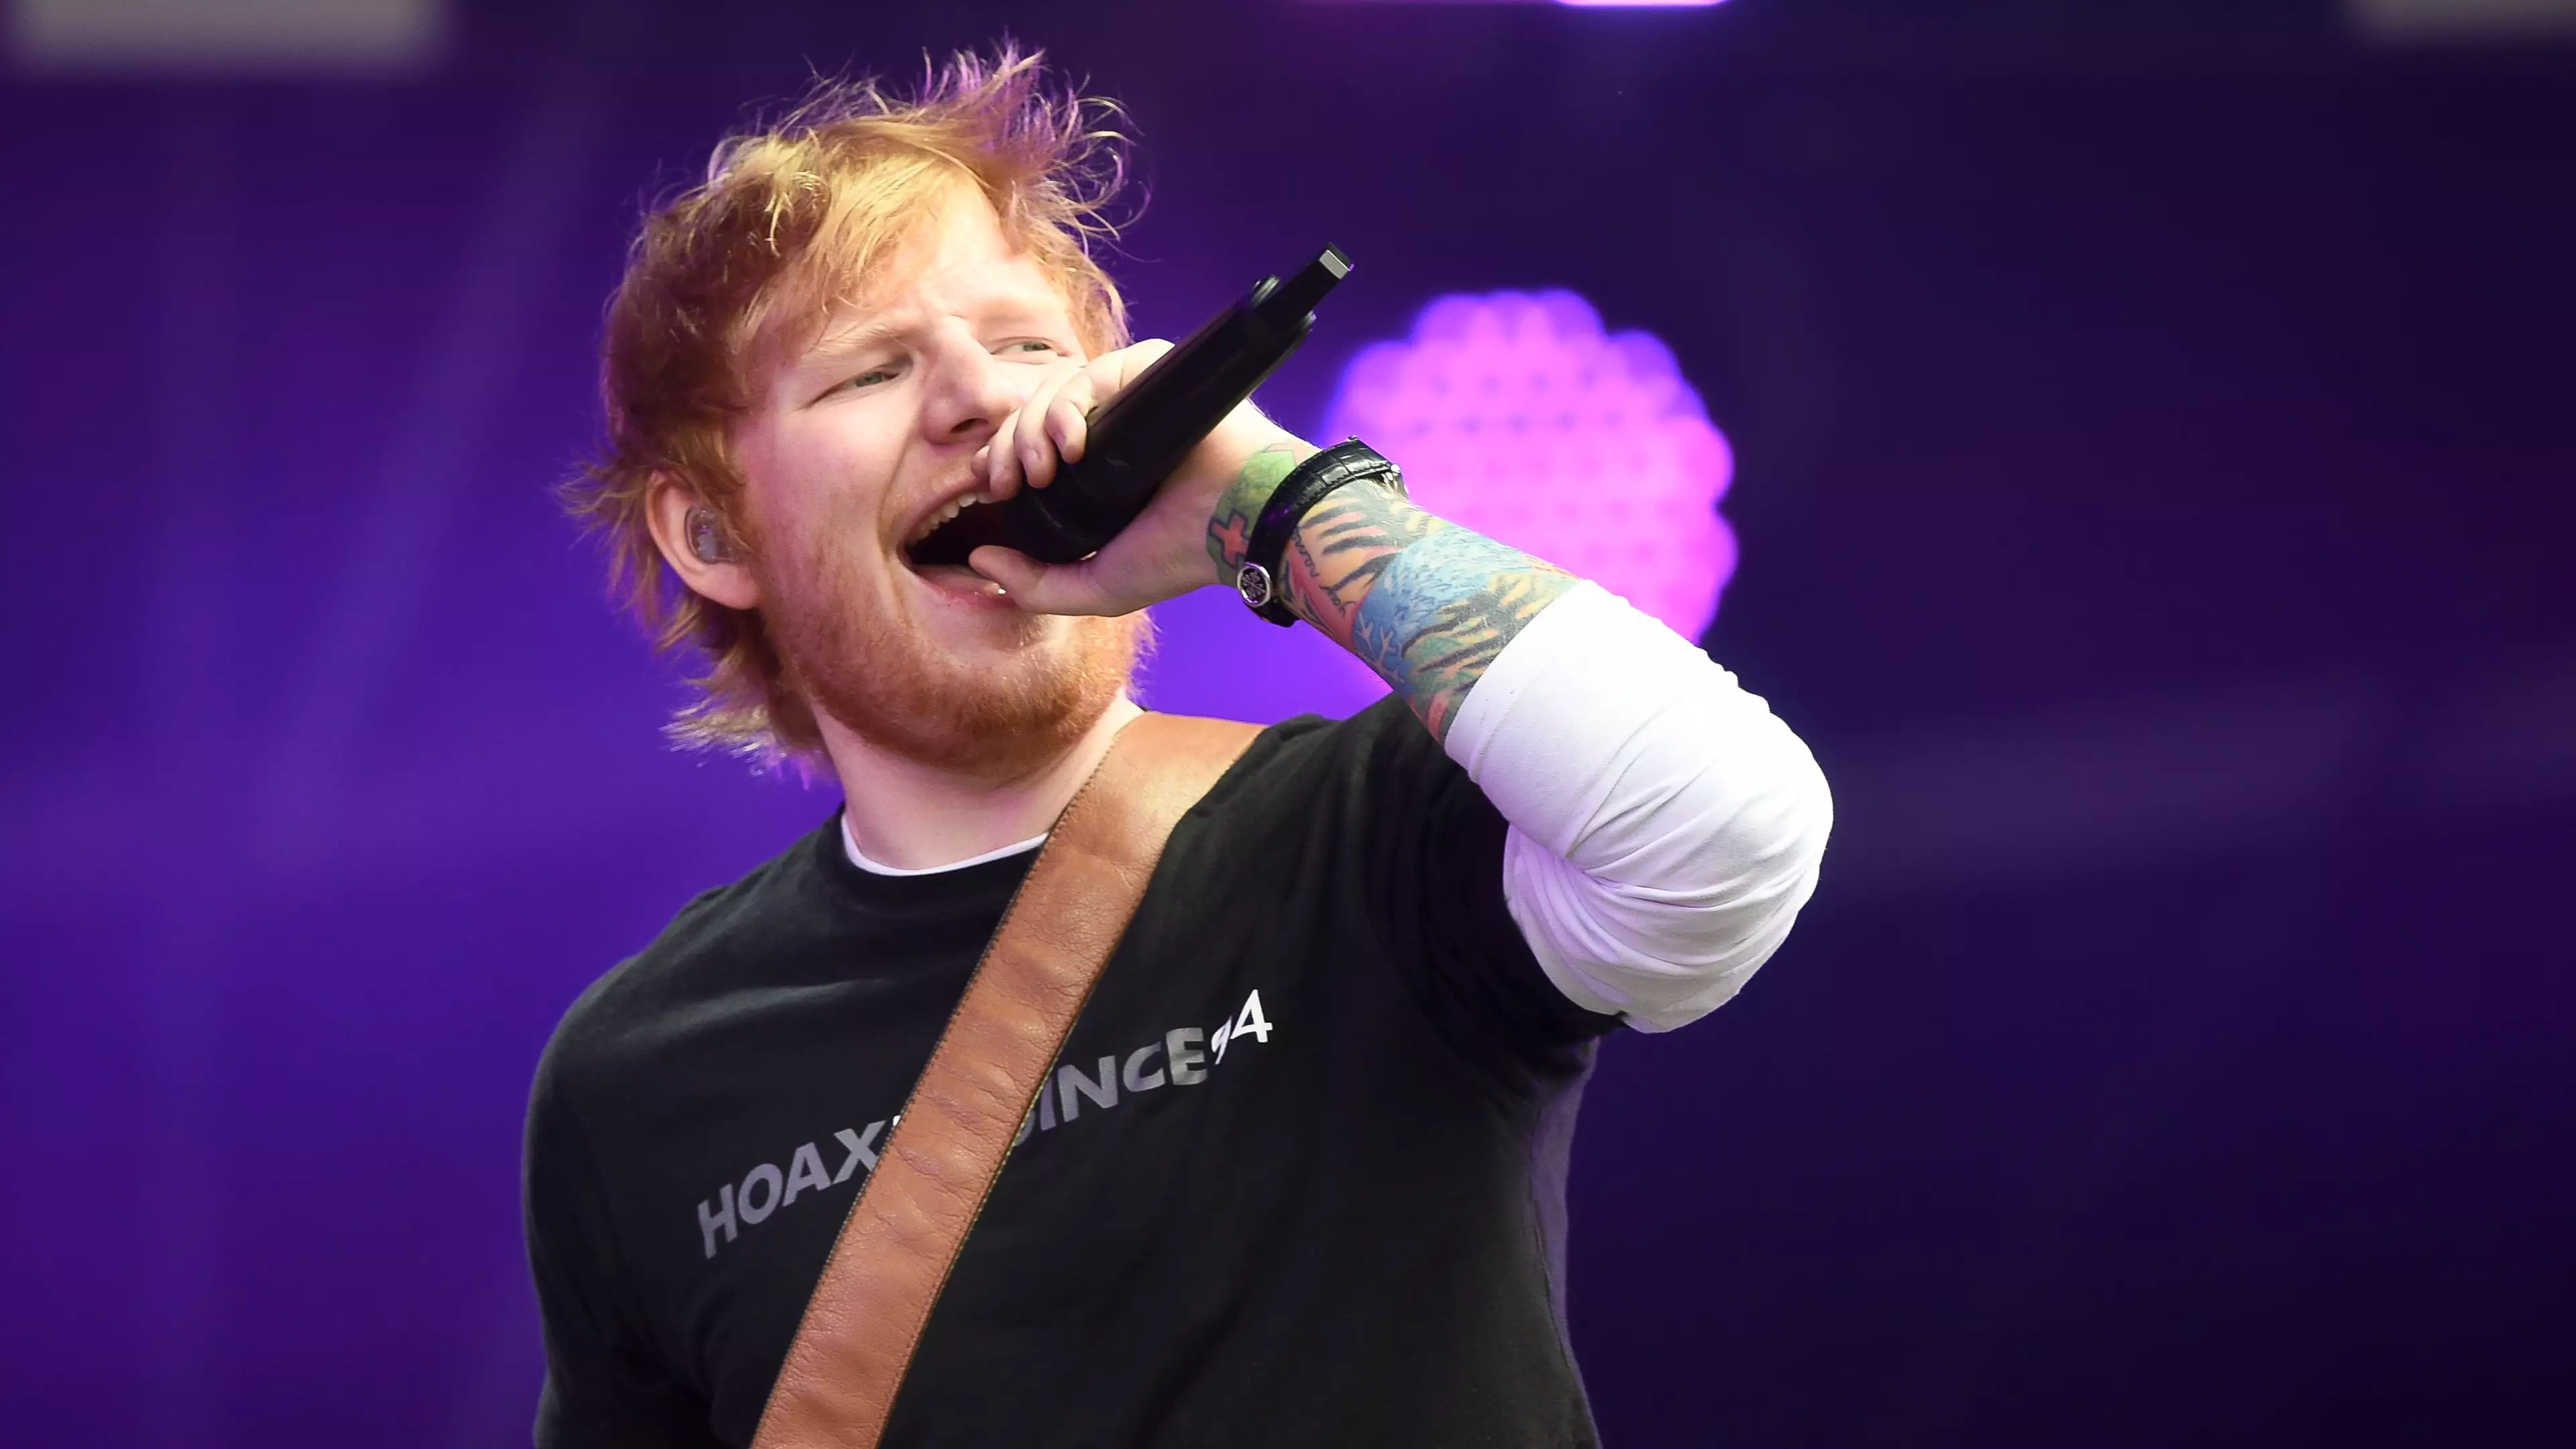 Ed Sheeran Chantry Park Tickets For August 2019 Shows.